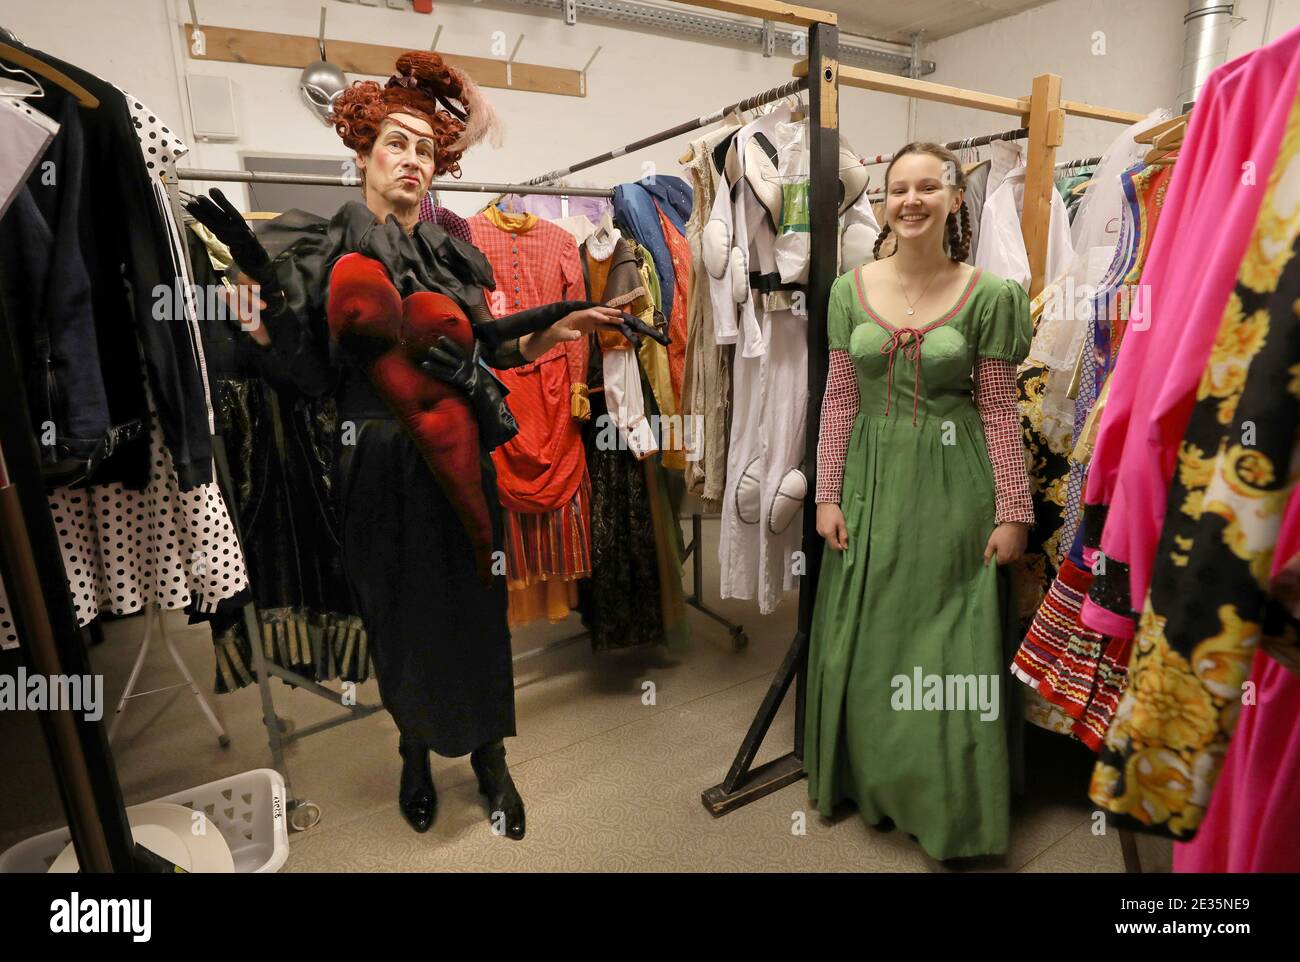 Rostock, Germany. 15th Jan, 2021. Ulrich K. Müller (l-r), actor, in the  costume of the Queen of Hearts from "Alice in Wonderland", and Klara Eham,  actress, in a dress from the play "